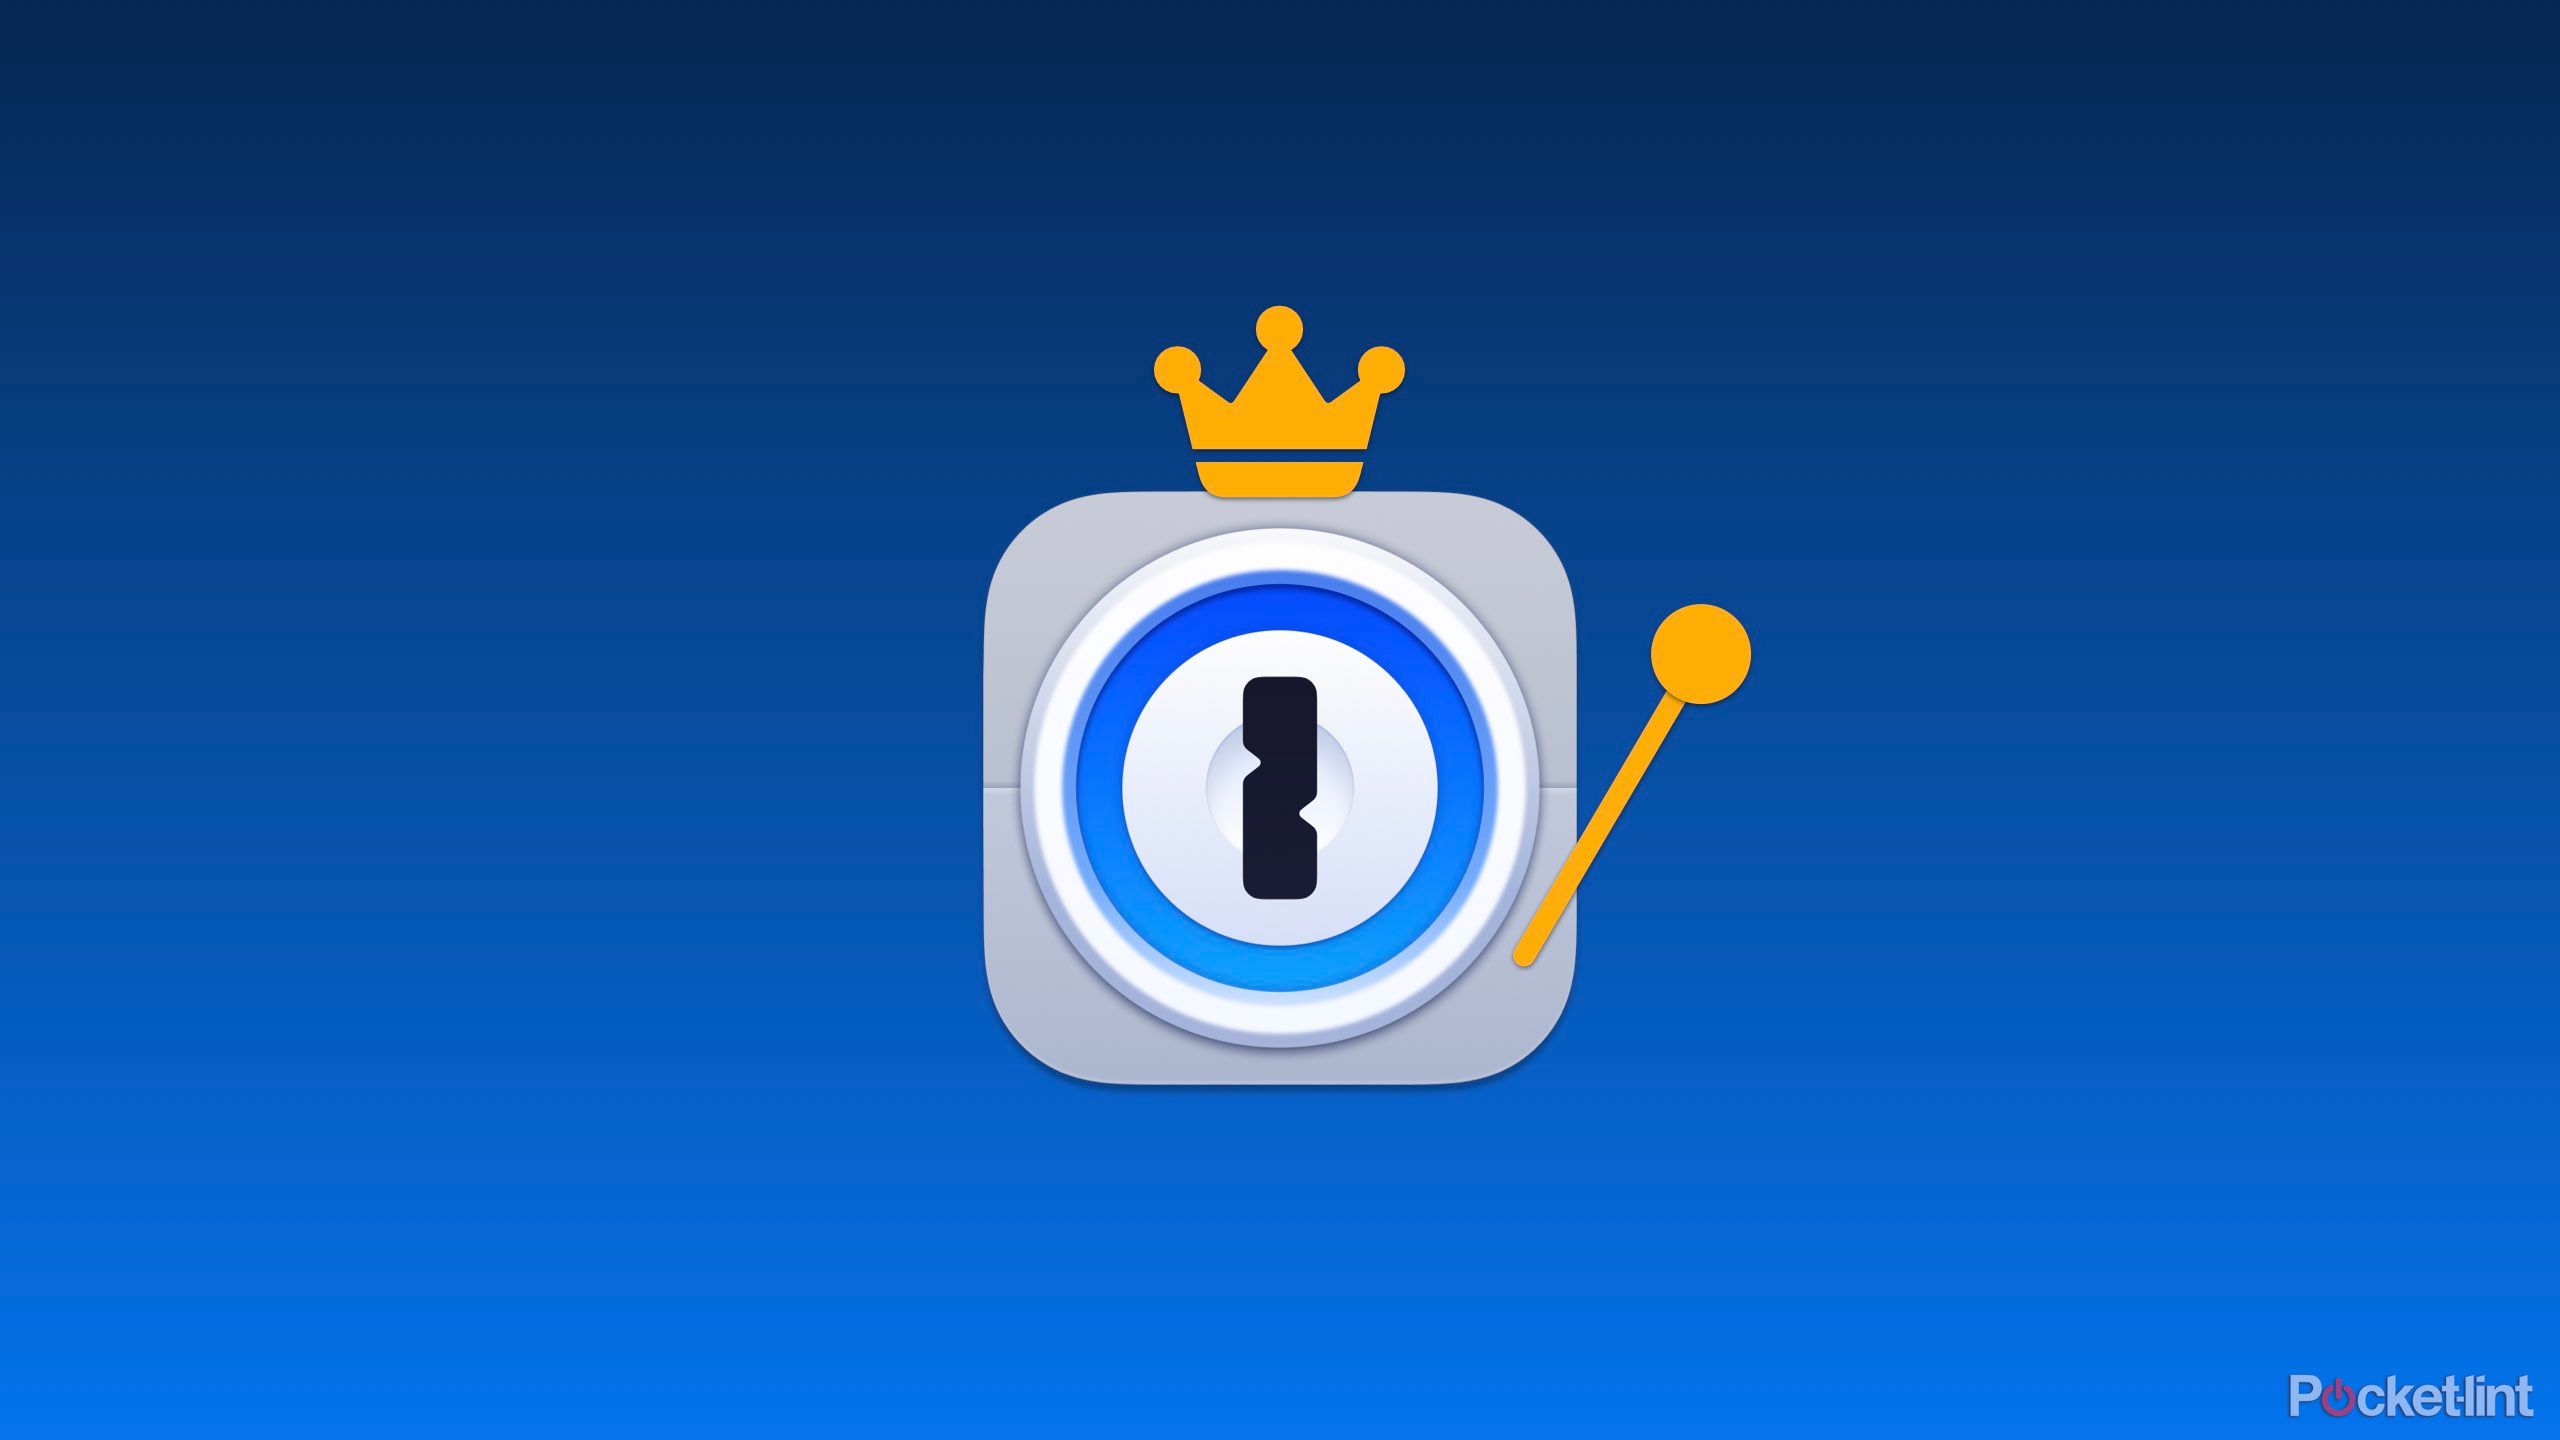 The 1Password app icon with a crown.